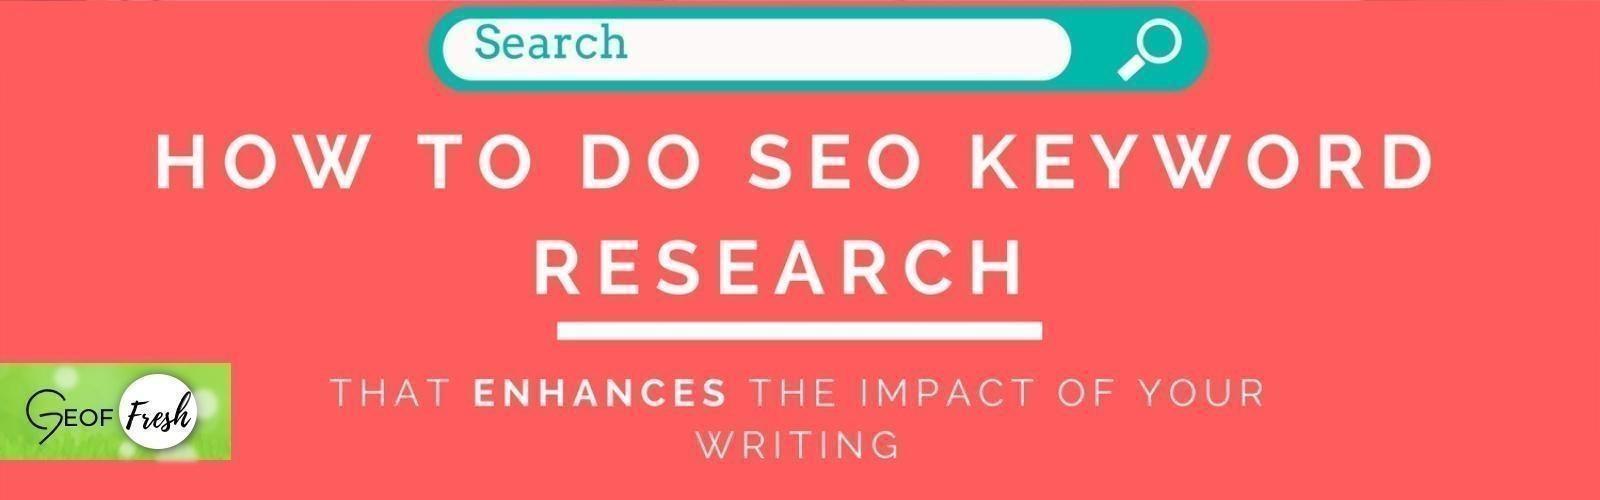 How To Do SEO Keyword Research